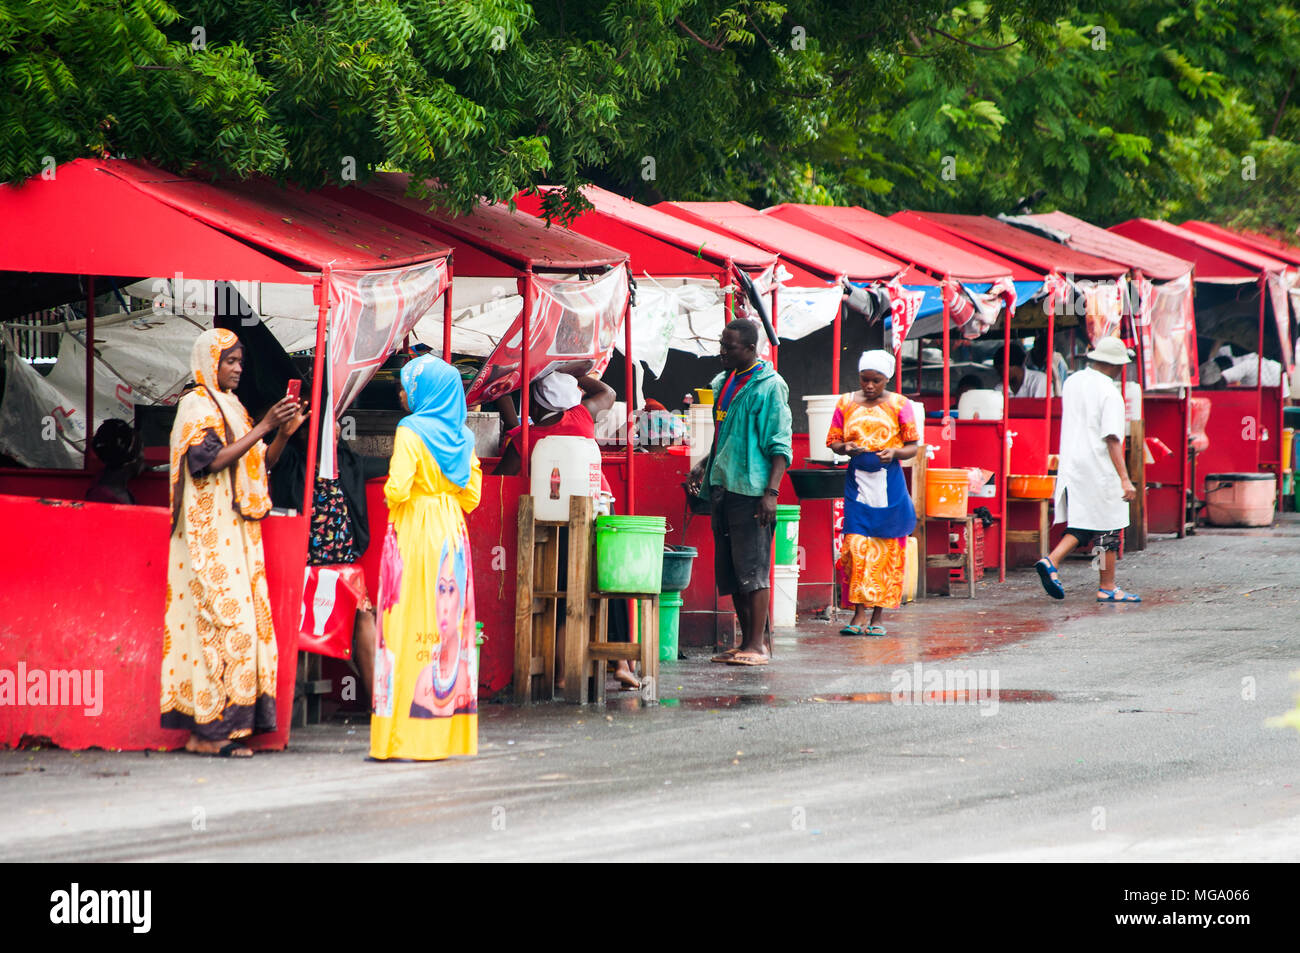 Row of fast food and barbecue kitchens on Bibi Titi Mohammed Street, Dar es Salaam, Tanzania Stock Photo